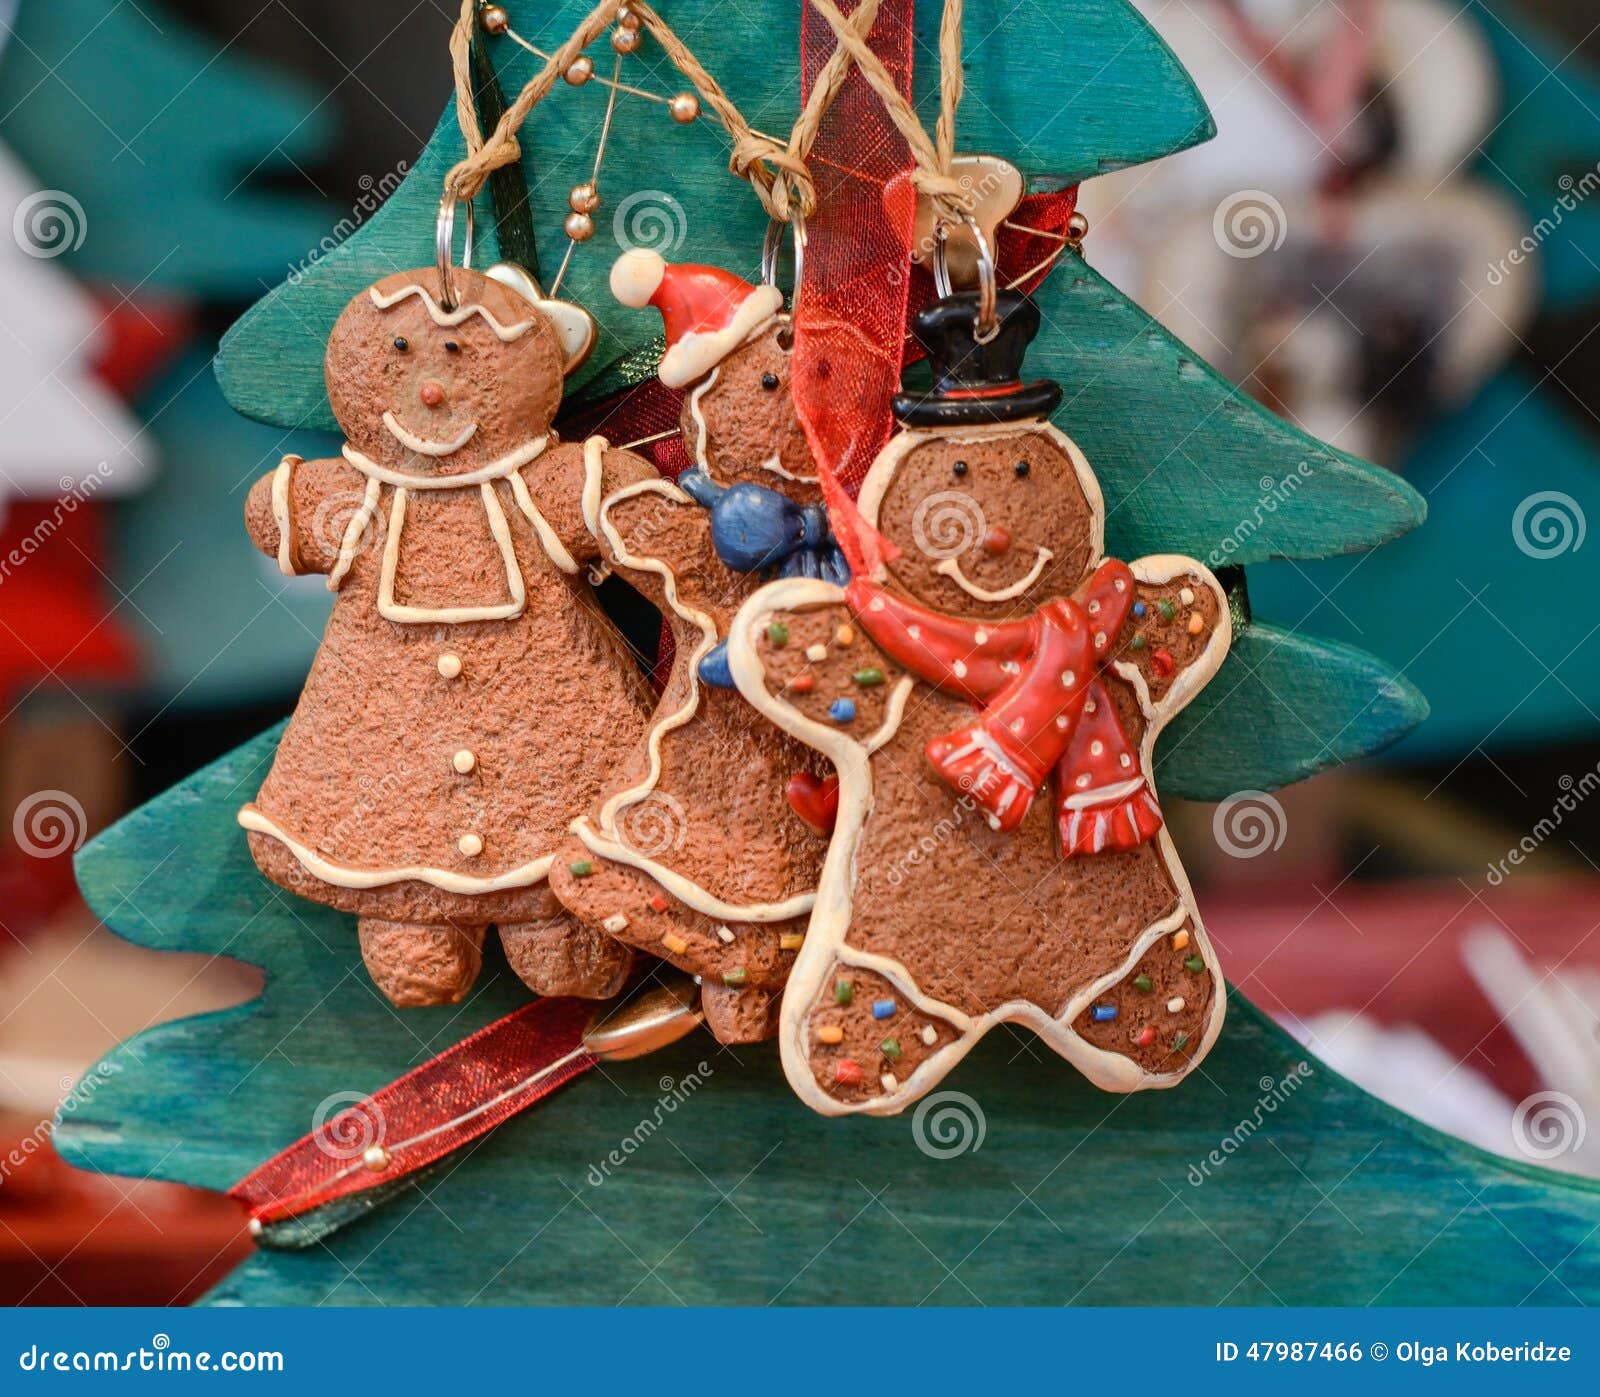 Christmas Market Decoration - Gingerbread Cookies Stock Photo - Image ...